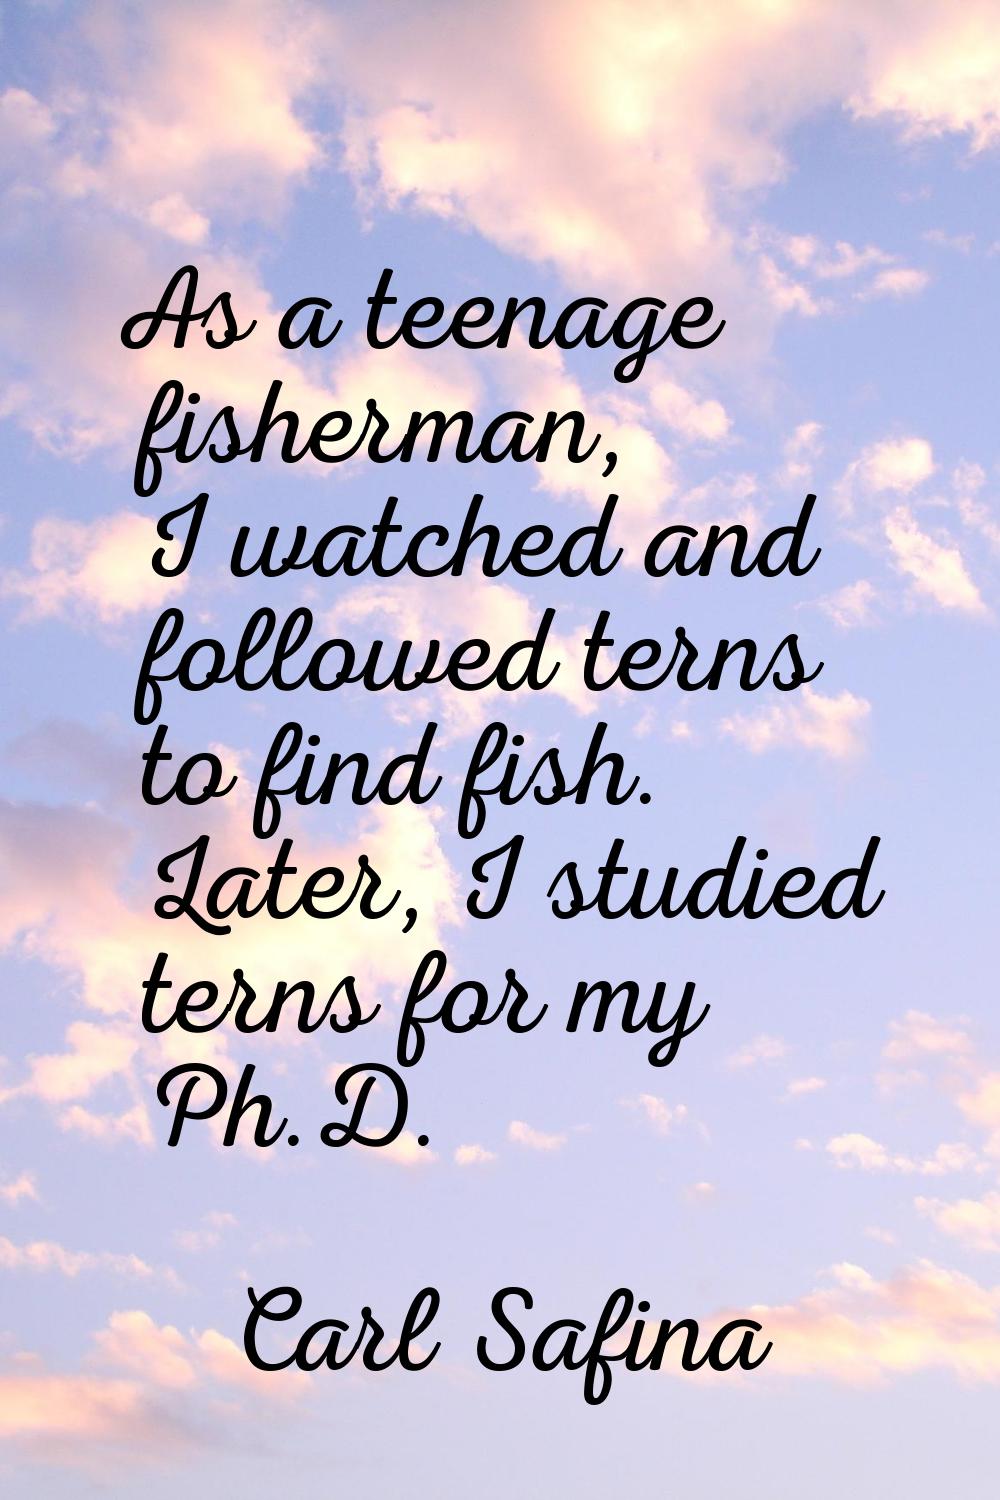 As a teenage fisherman, I watched and followed terns to find fish. Later, I studied terns for my Ph